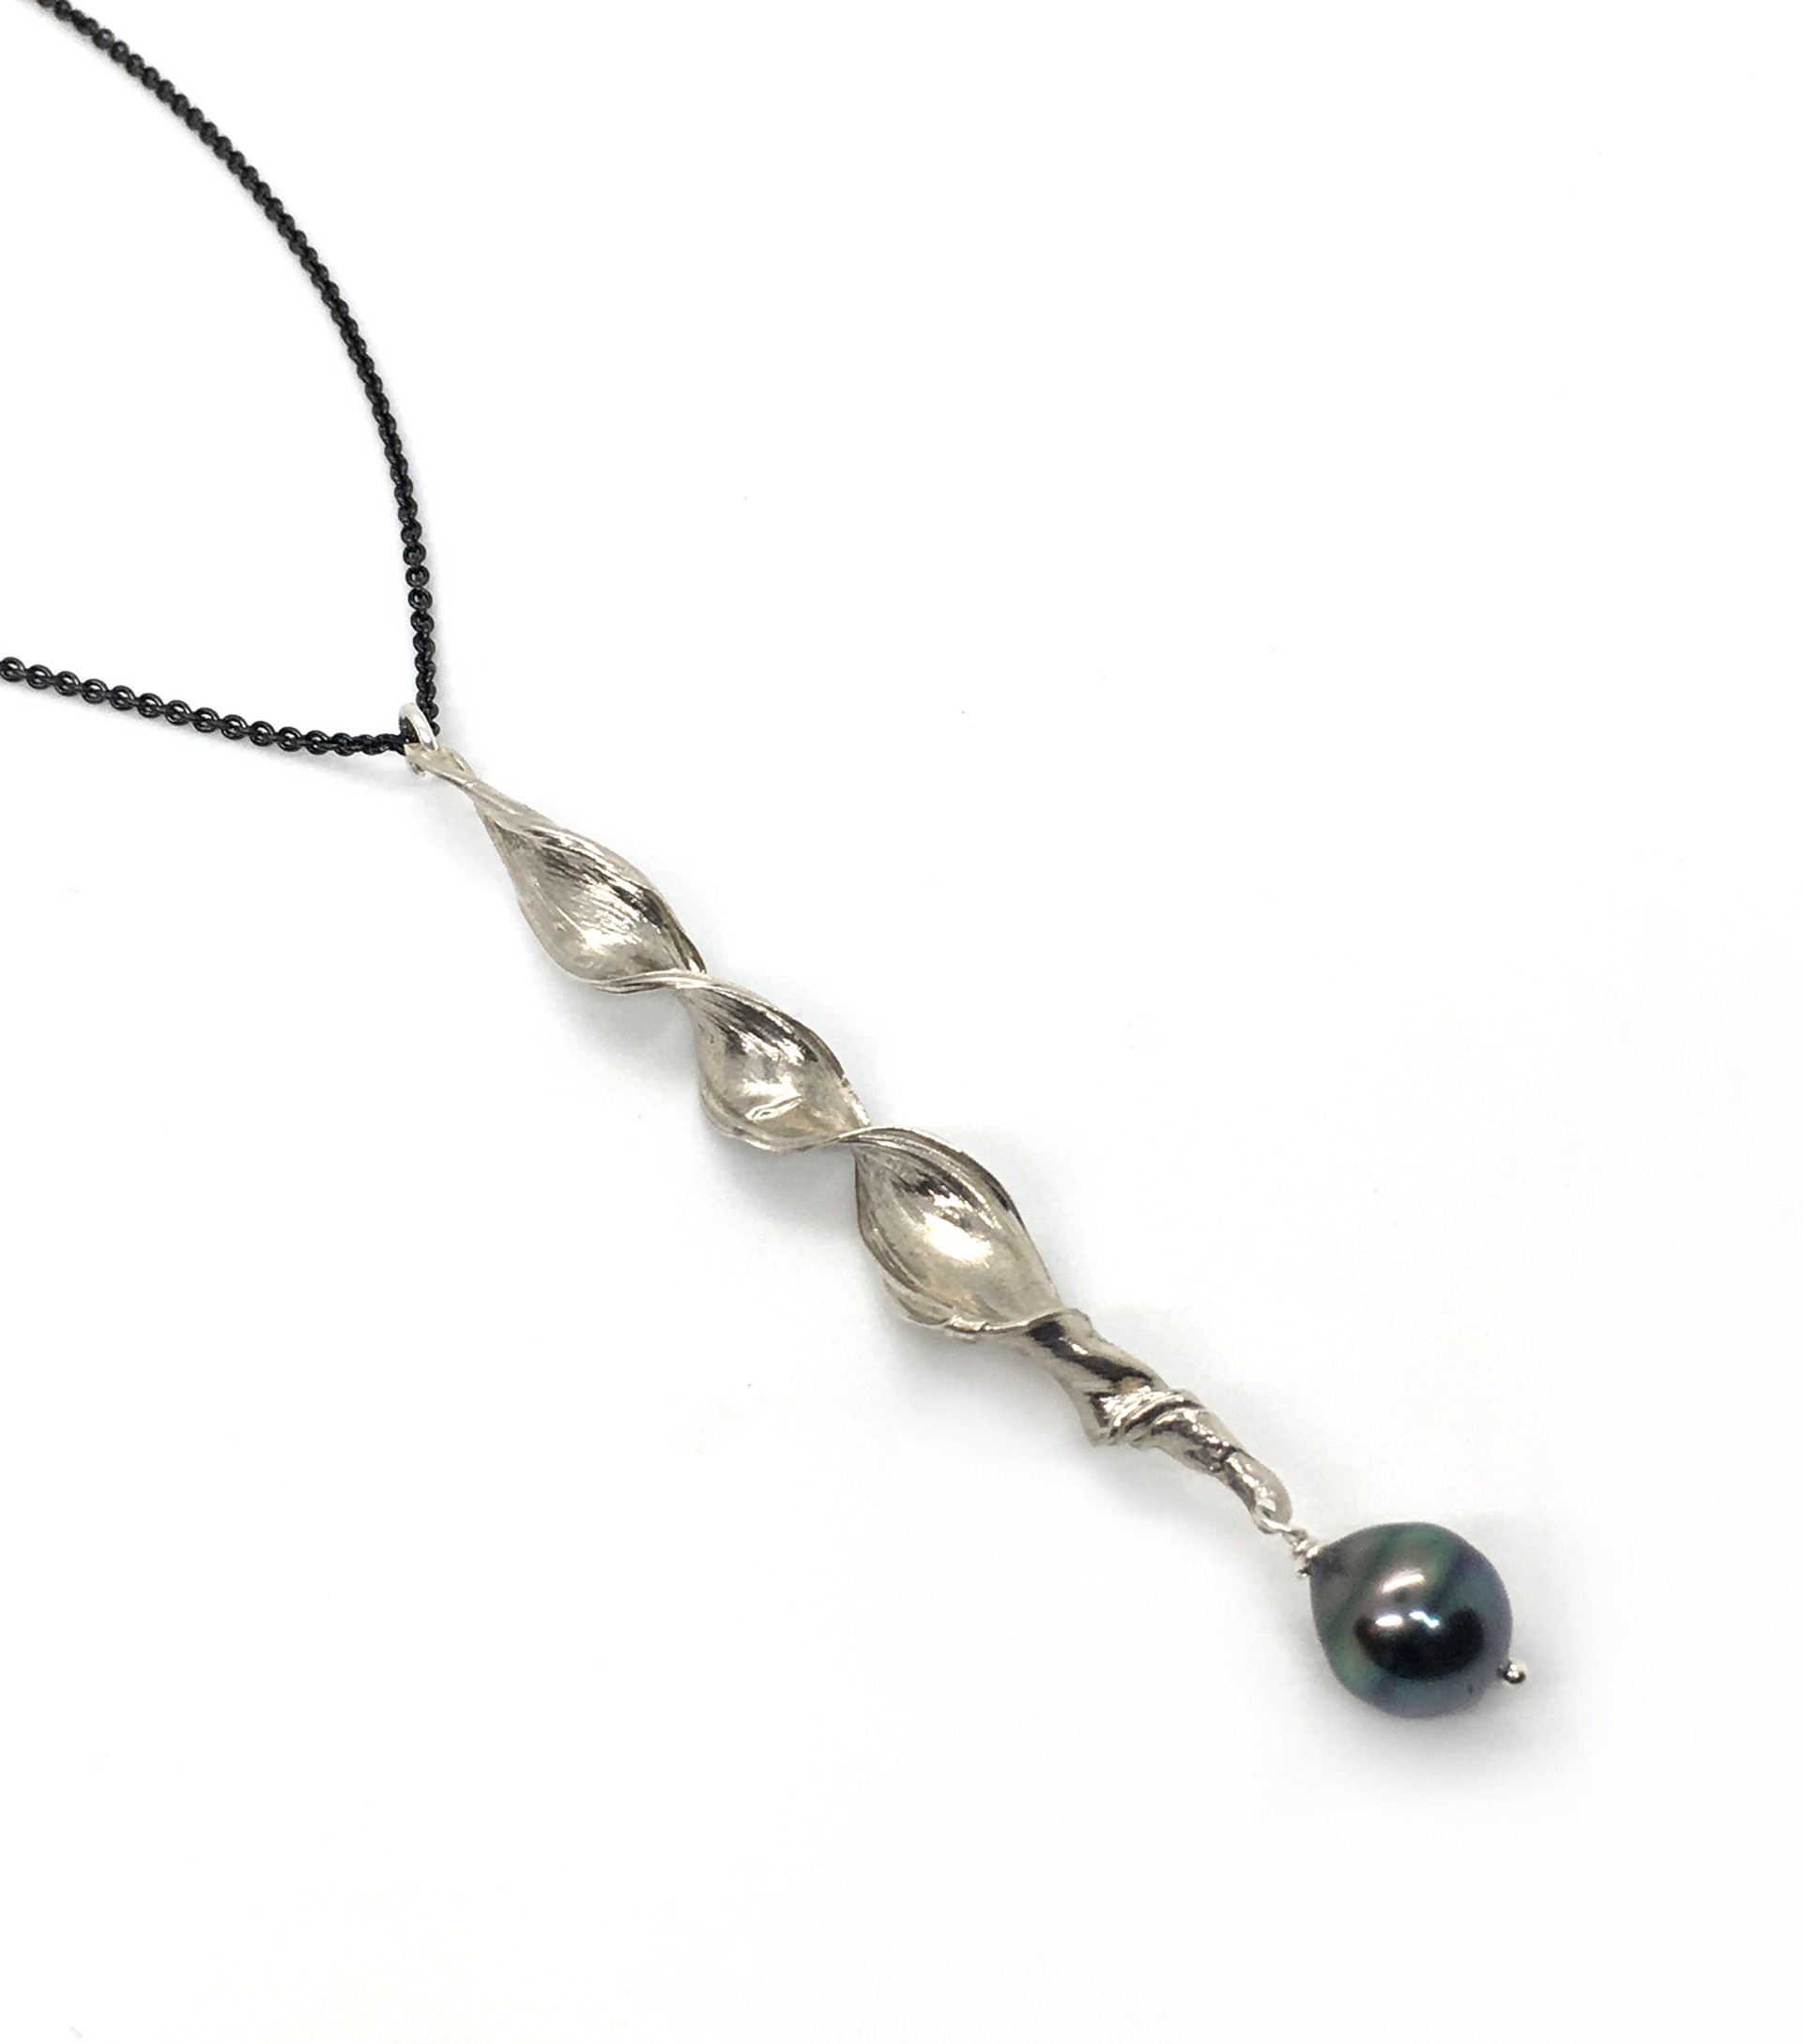  Mitsuro Hikime Sterling Silver Twist Pendant with Tahitian Pearl  by Melicia Phillips